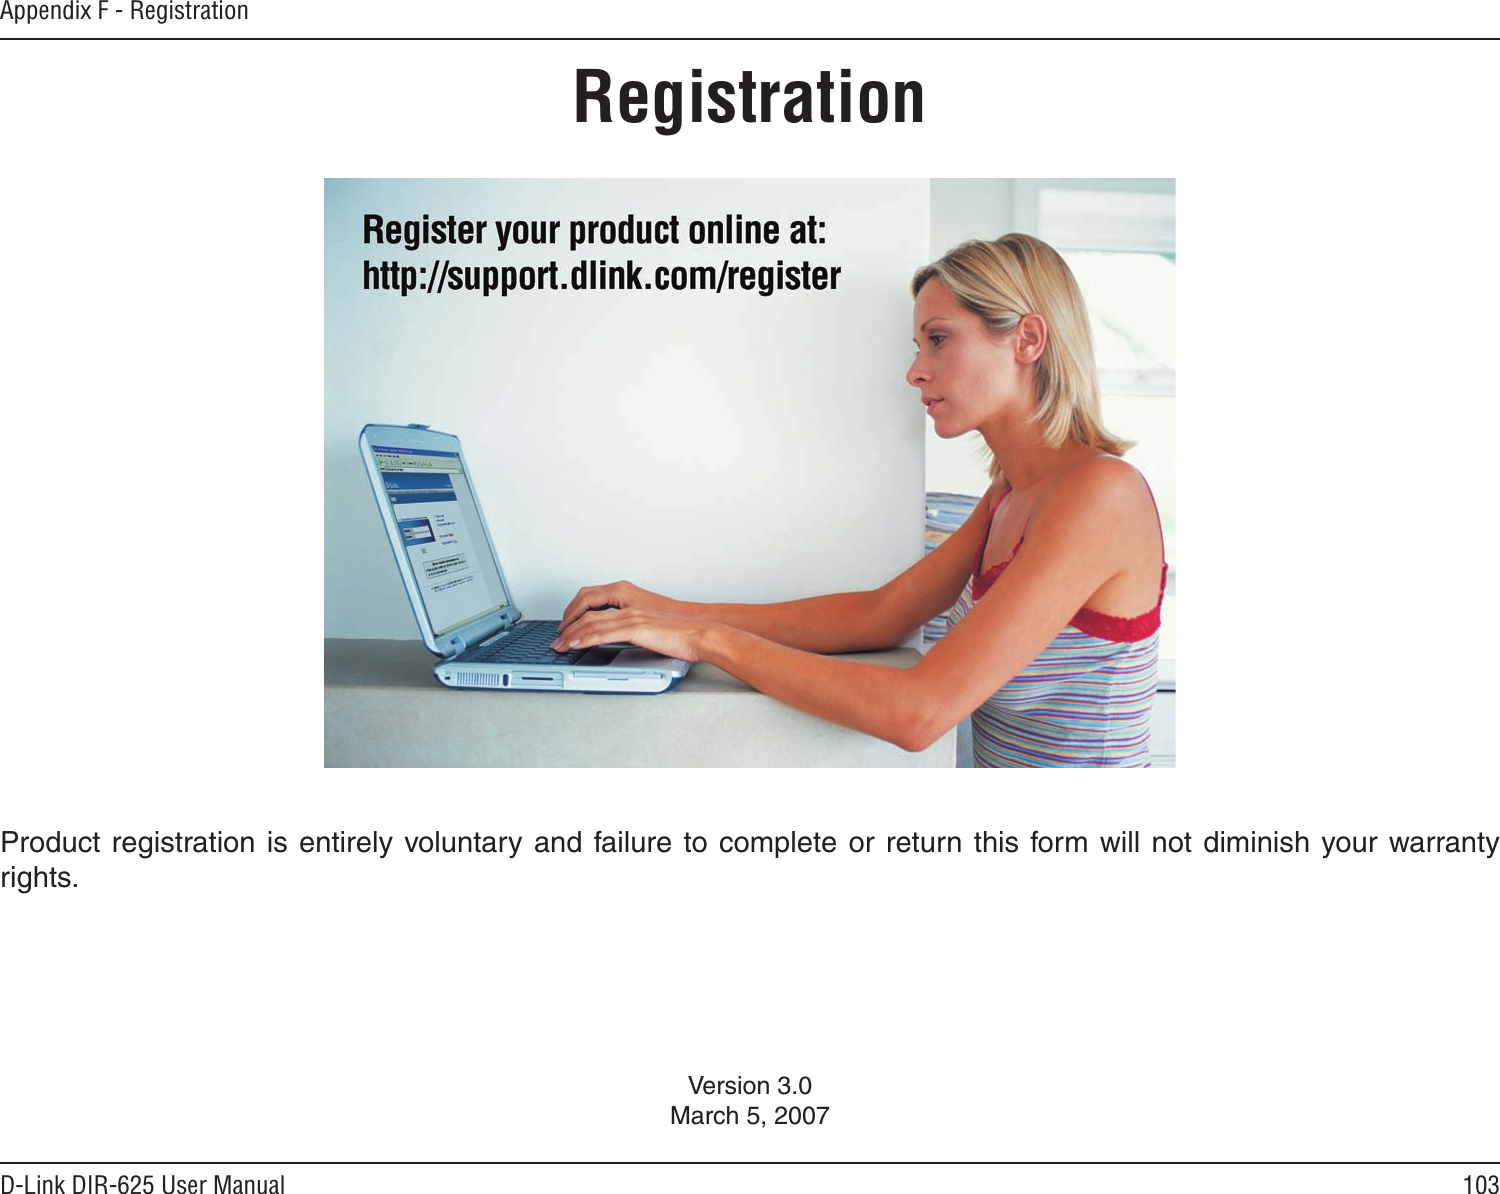 103D-Link DIR-625 User ManualAppendix F - RegistrationVersion 3.0March 5, 2007Product registration is entirely voluntary and failure to complete or return this form will not diminish your warranty rights.Registration